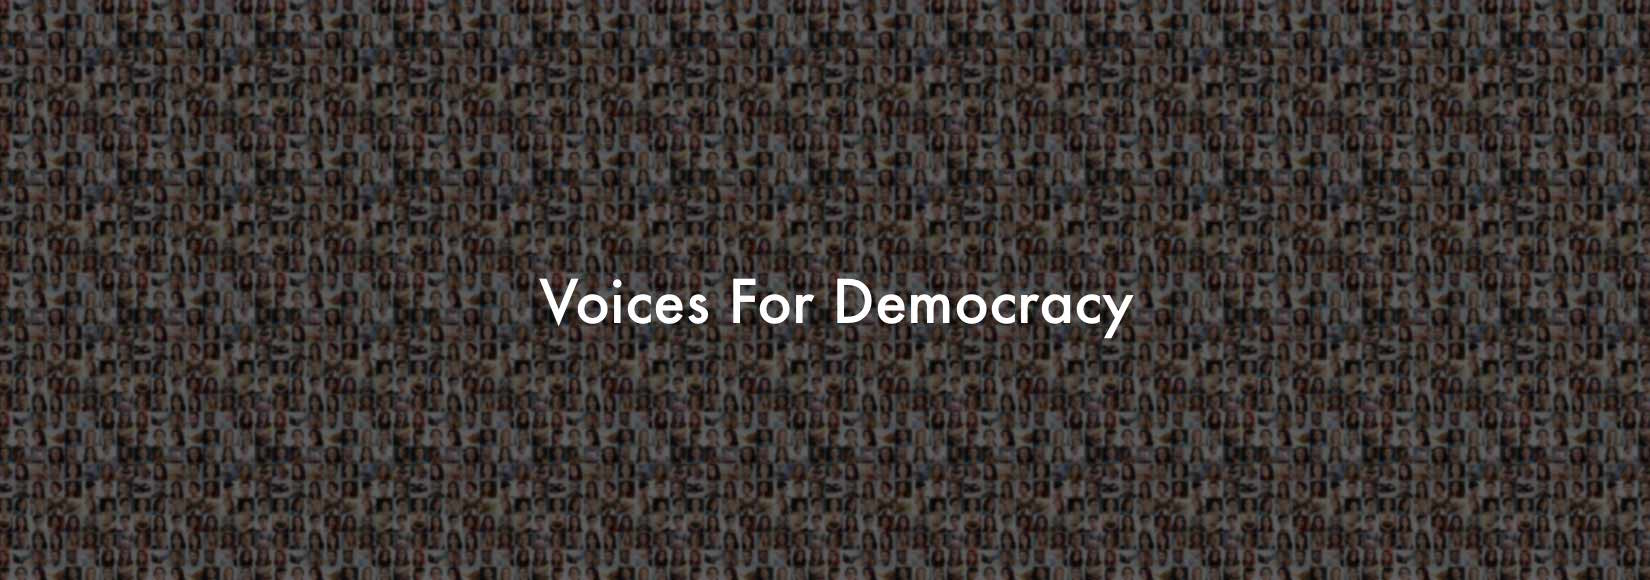 voices-for-democracy